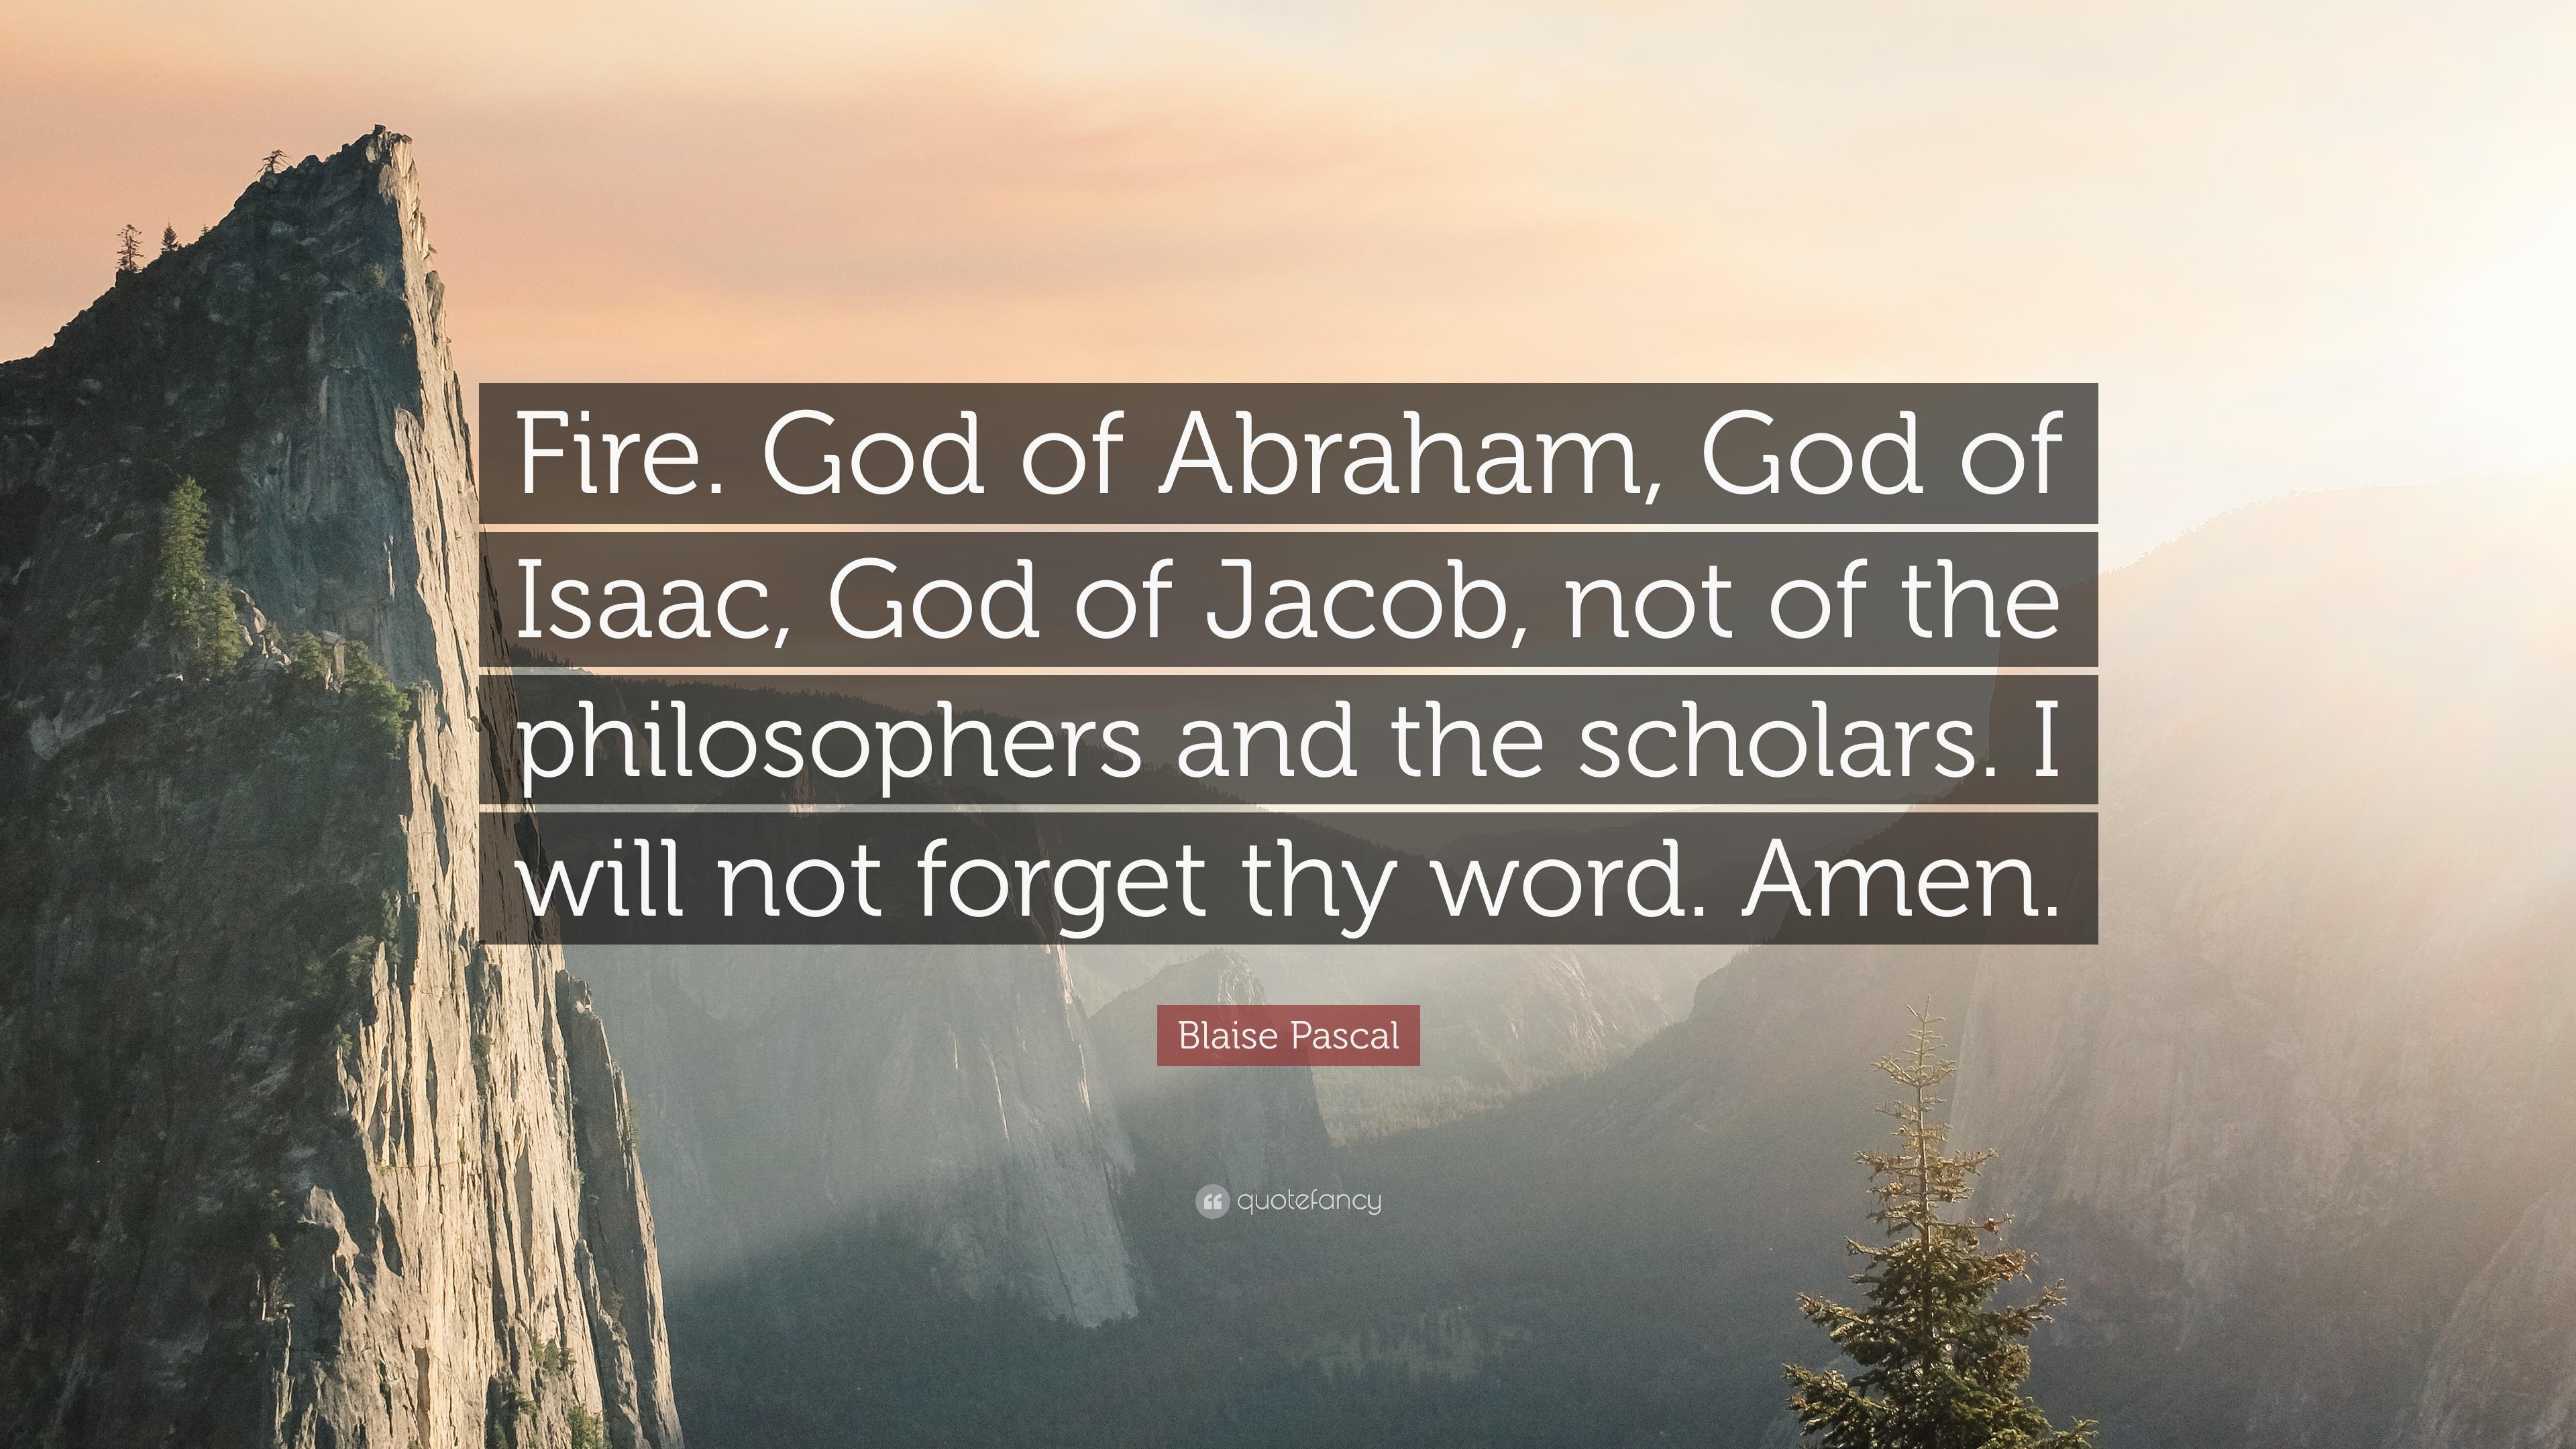 Blaise Pascal Quote: “Fire. God of Abraham, God of Isaac